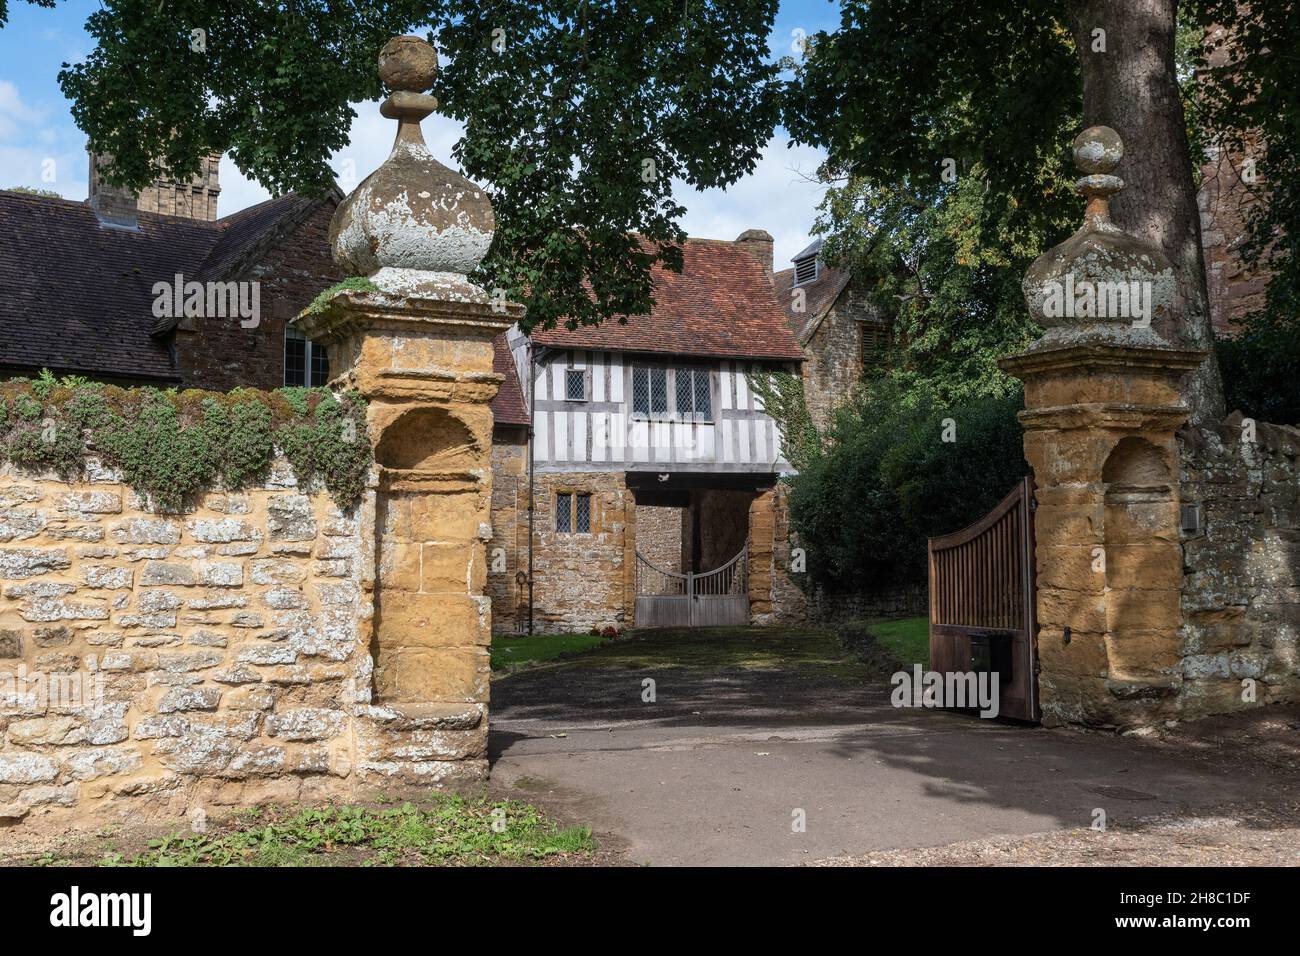 Half timbered gatehouse at the Manor, Ashby St Ledgers, UK;  the Gunpowder Plotters met here to plan the blowing up of Parliament in 1605 Stock Photo